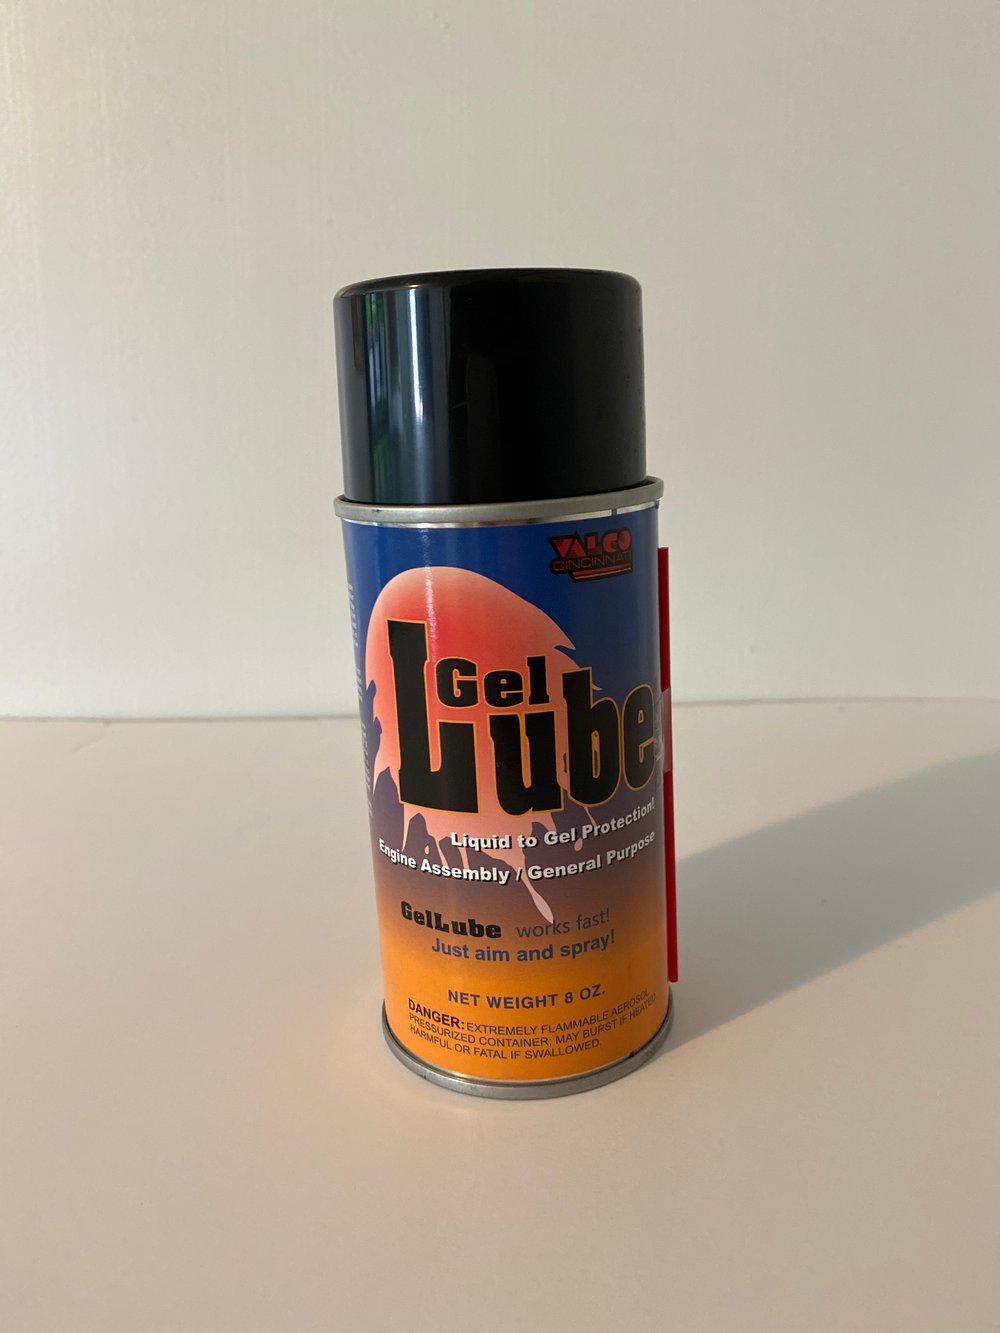 GREAT BARGAIN! Gel Lube By The Case!! (6) 🇺🇸 